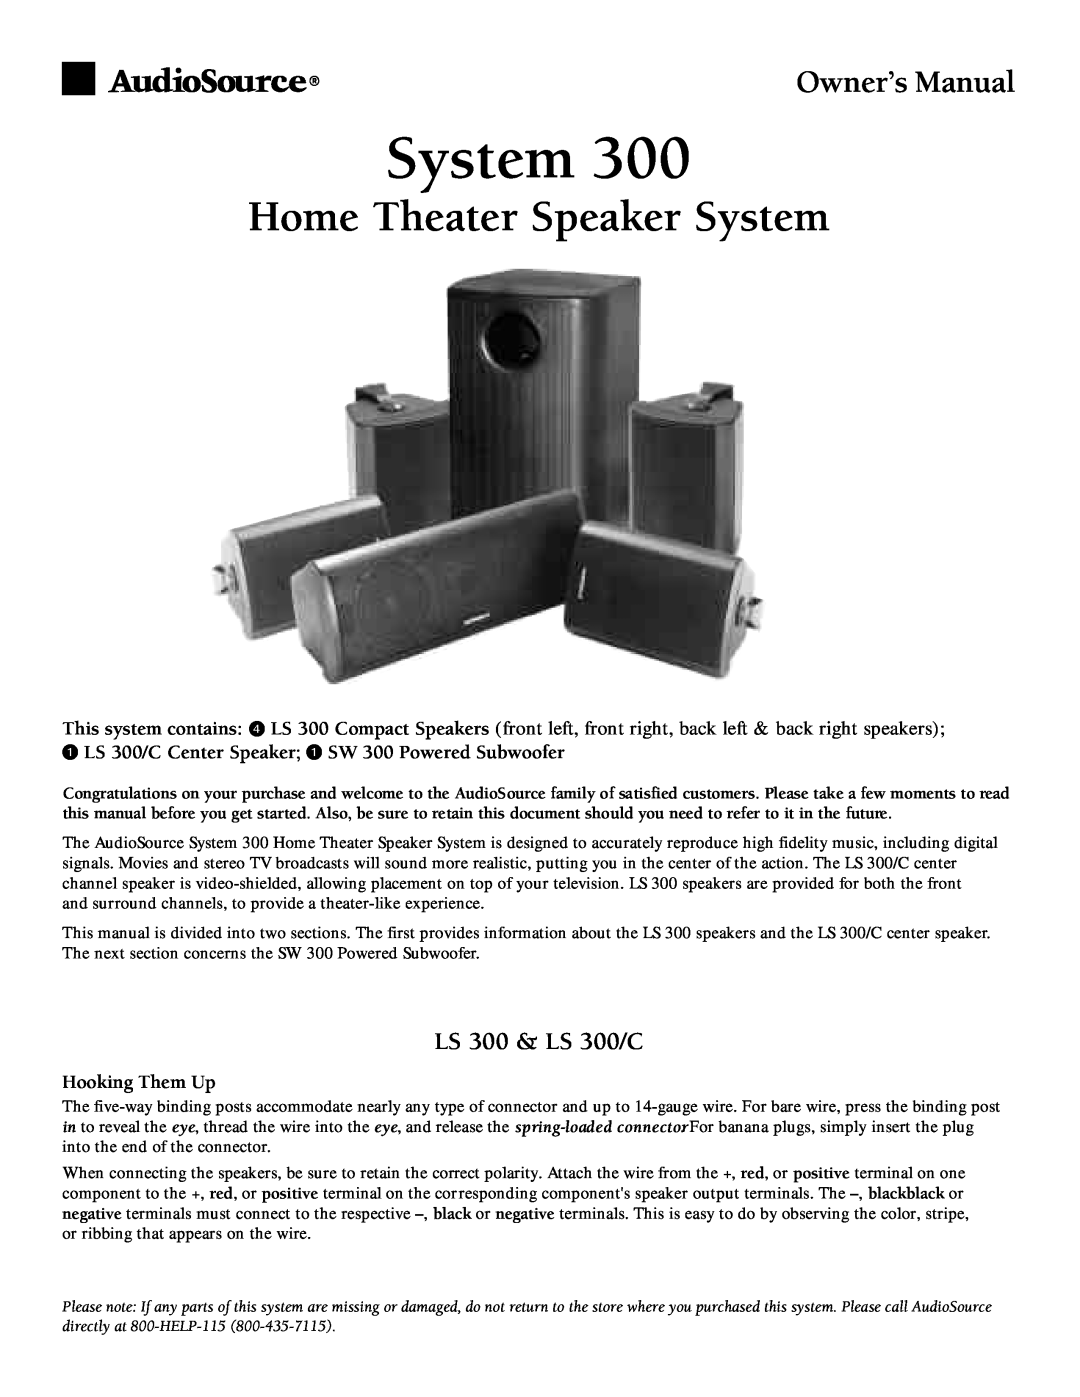 AudioSource LS300 owner manual LS 300 & LS 300/C, Hooking Them Up, Home Theater Speaker System 